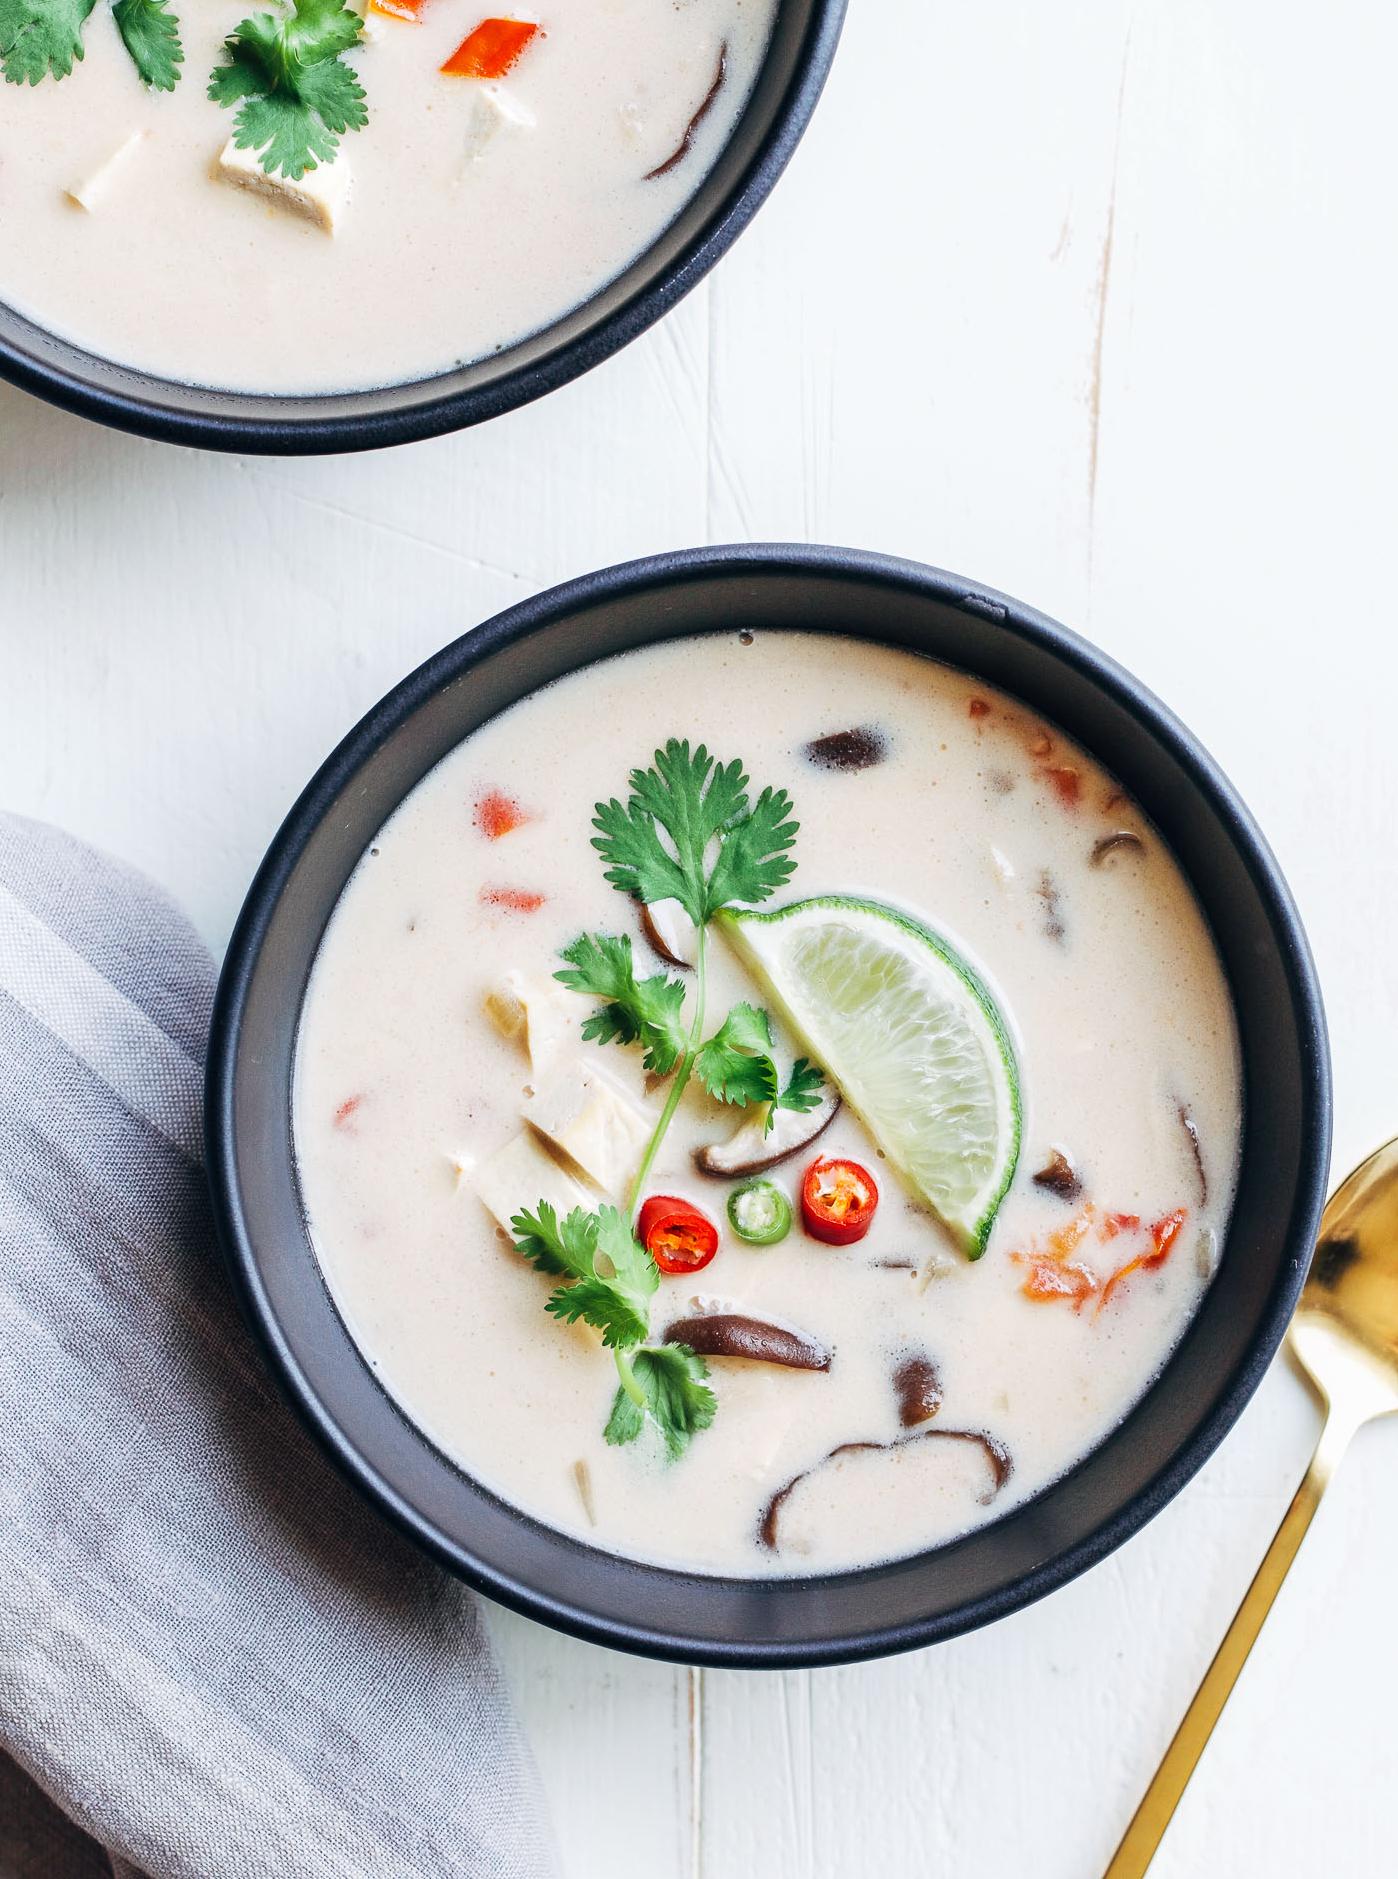  The combination of lemongrass, galangal, and kaffir lime leaves give this soup an authentic Thai flavor.